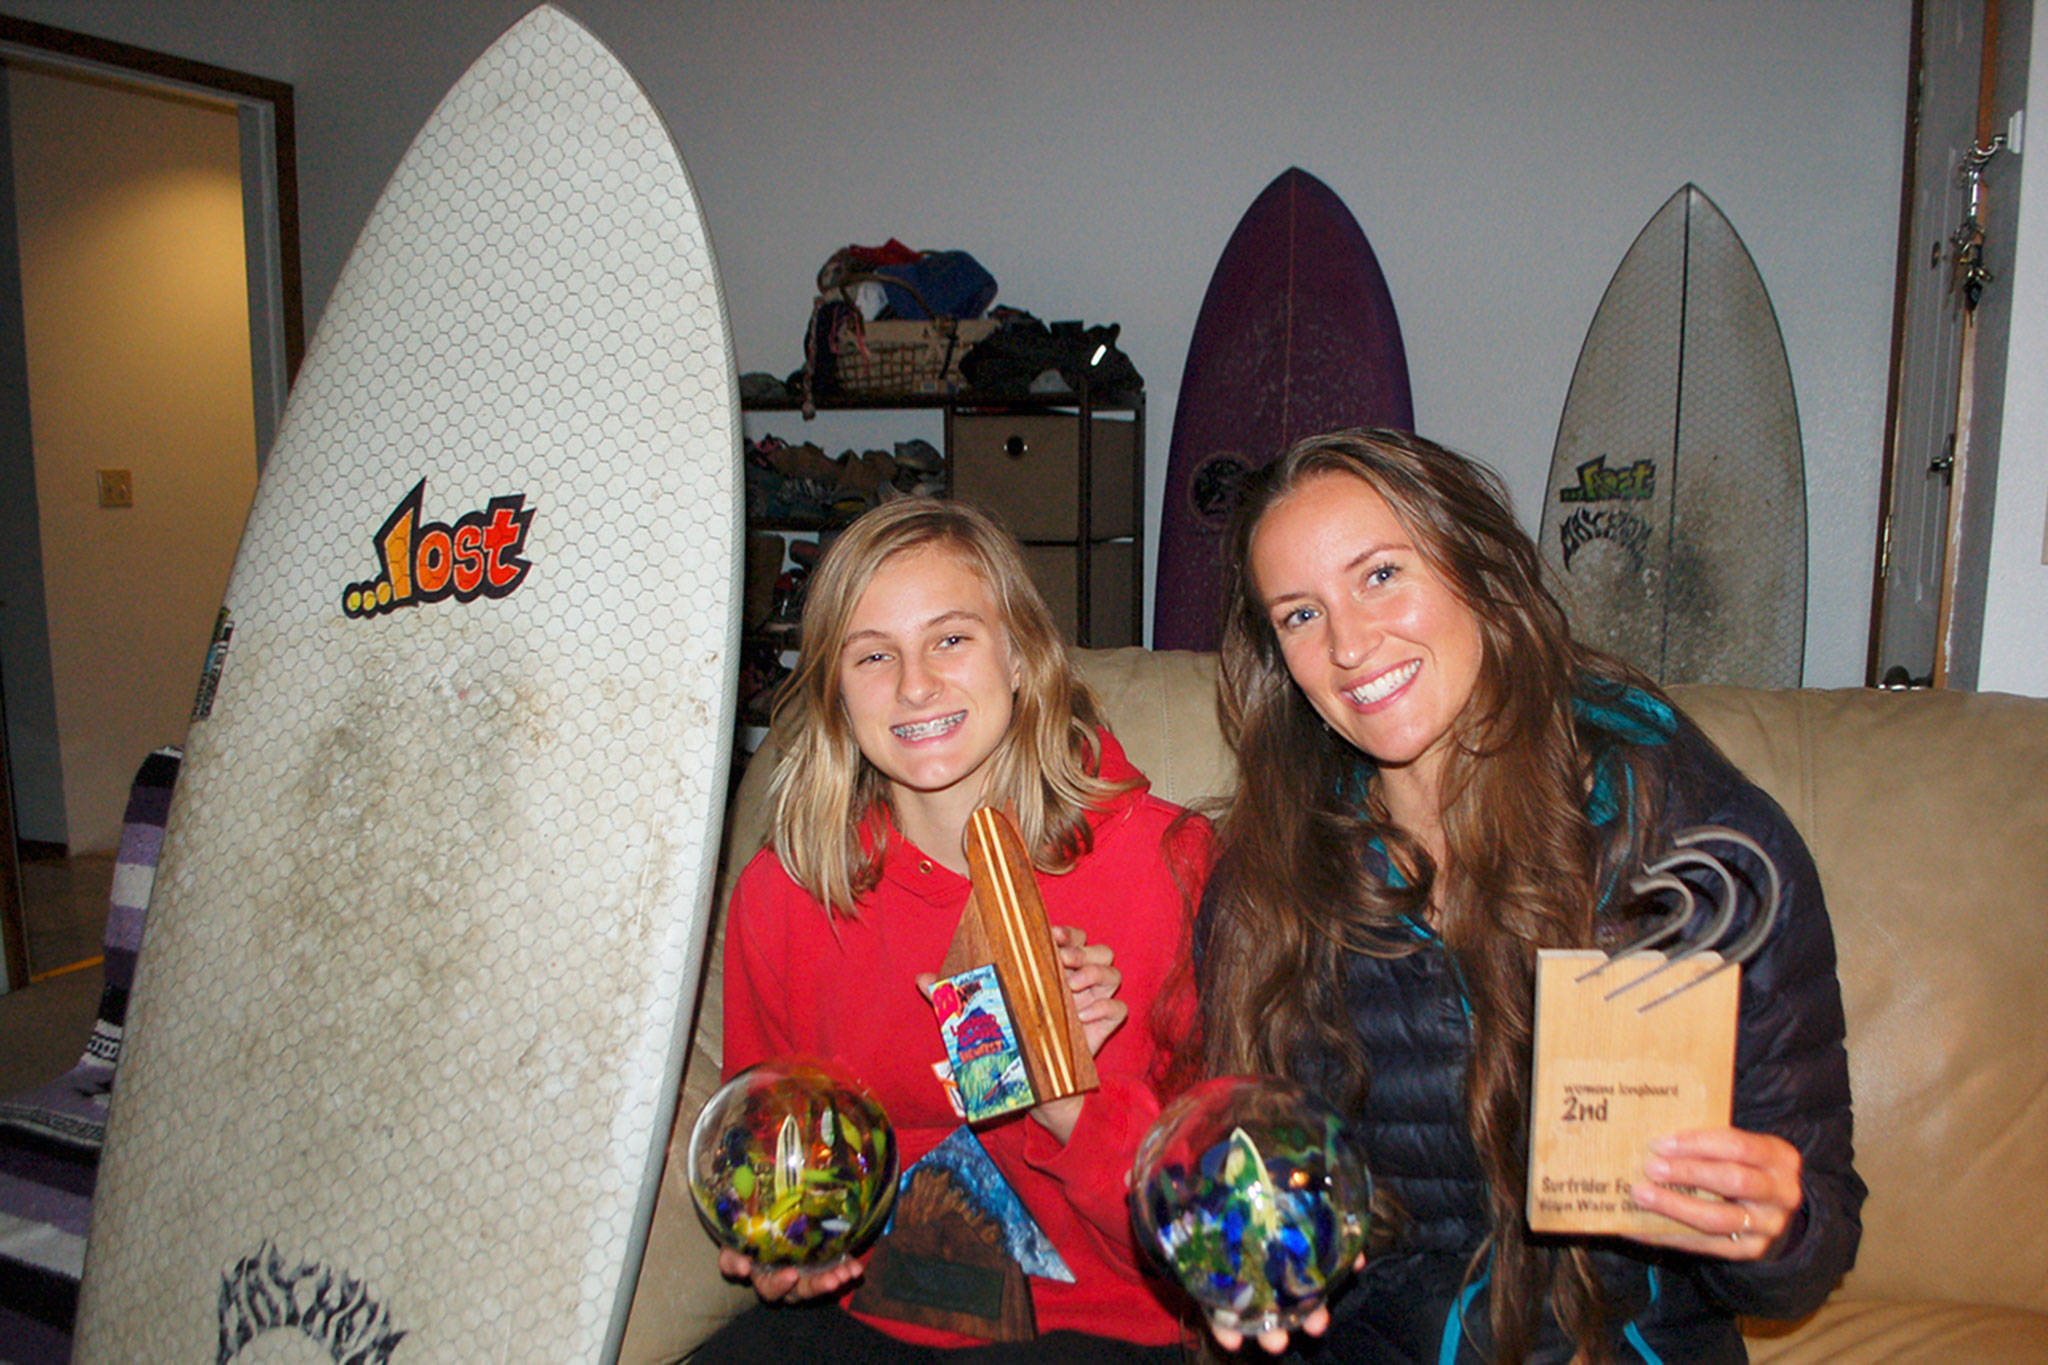 Gemma Davis, 16, left, followed in her mother Melissa Davis’ footsteps as a competitive surfer living in Sequim. Both mother and daughter share a passion for the sport and enjoy traveling to competitions up and down the West Coast. (Erin Hawkins/Olympic Peninsula News Group)